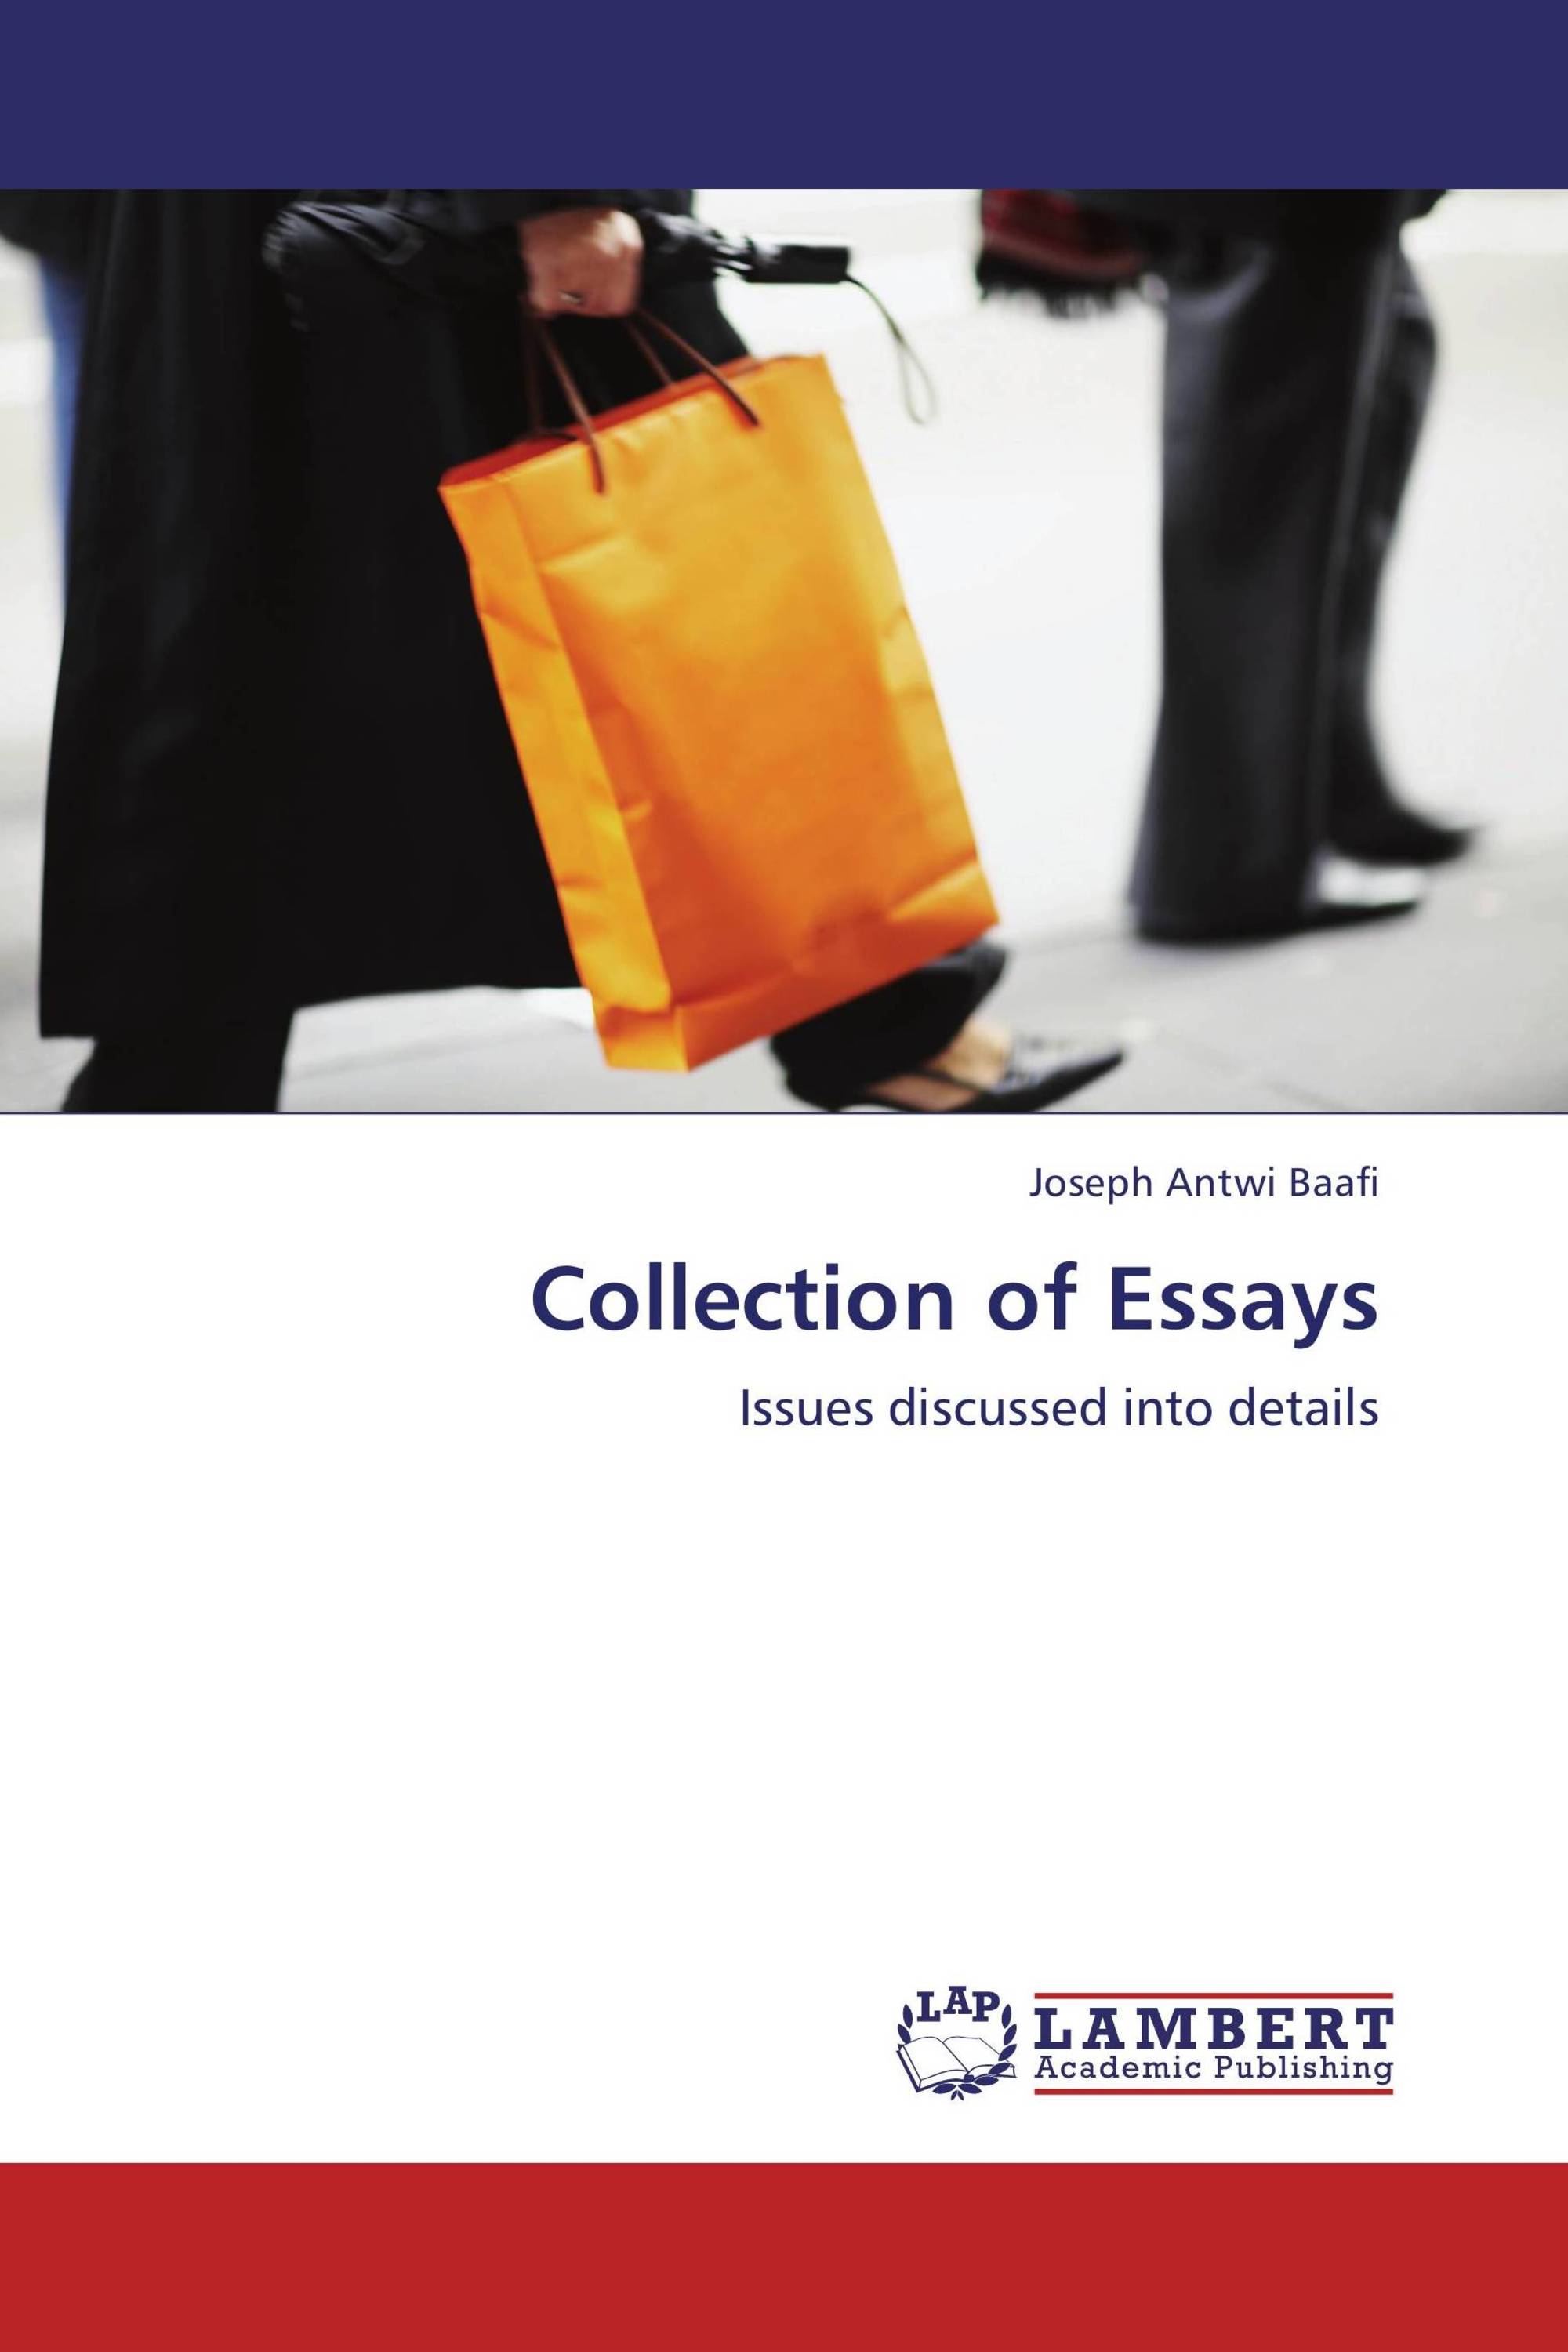 book that is a collection of essays